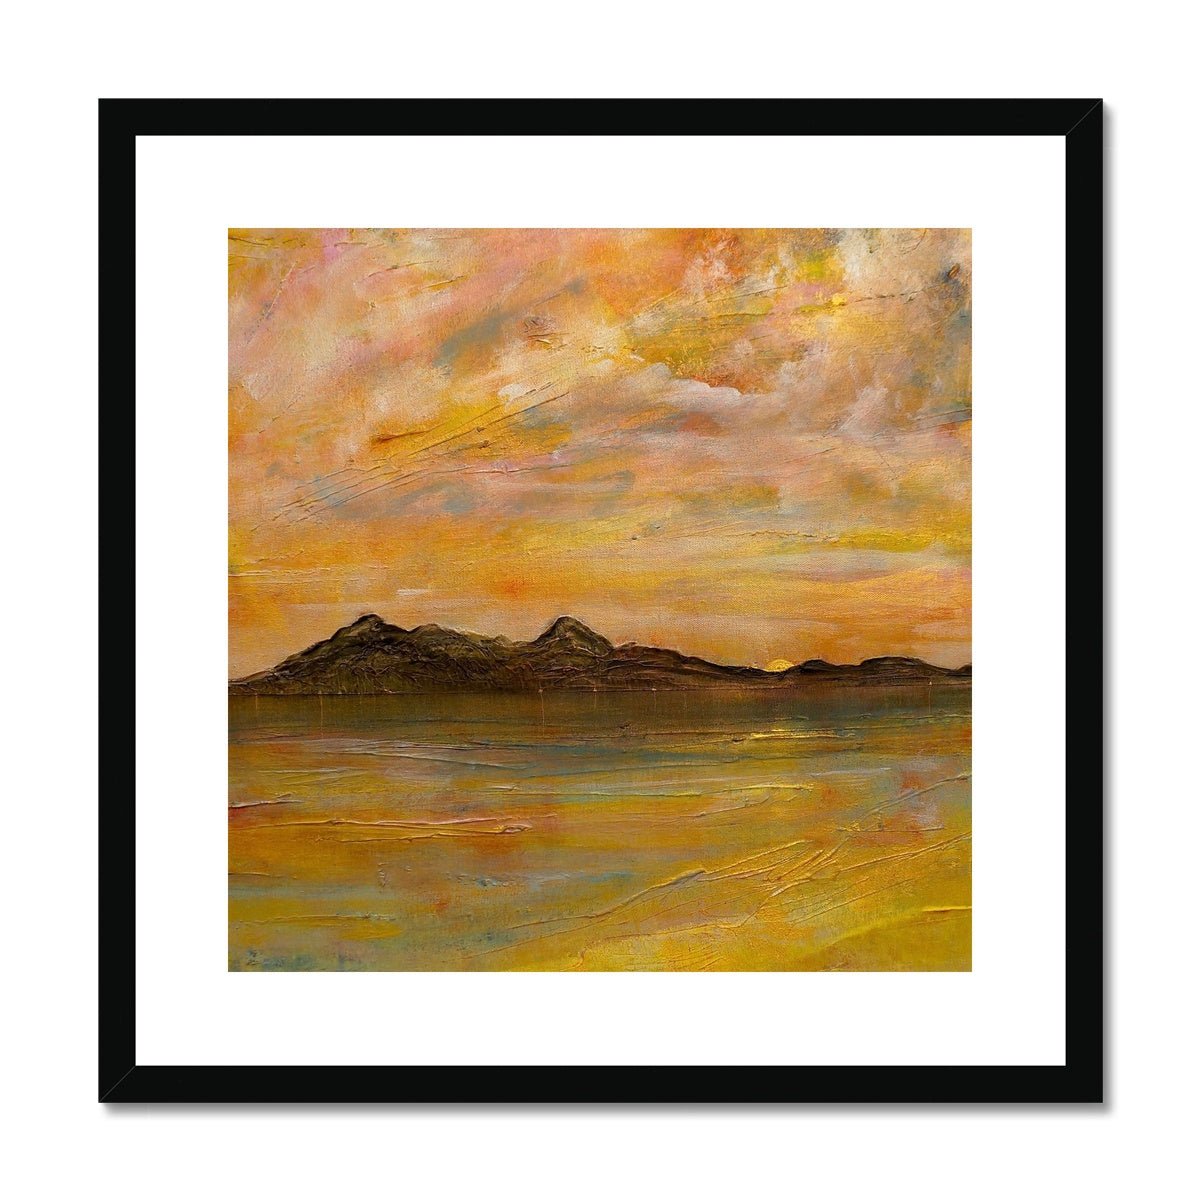 Arran Dusk Painting | Framed & Mounted Prints From Scotland-Framed & Mounted Prints-Arran Art Gallery-20"x20"-Black Frame-Paintings, Prints, Homeware, Art Gifts From Scotland By Scottish Artist Kevin Hunter